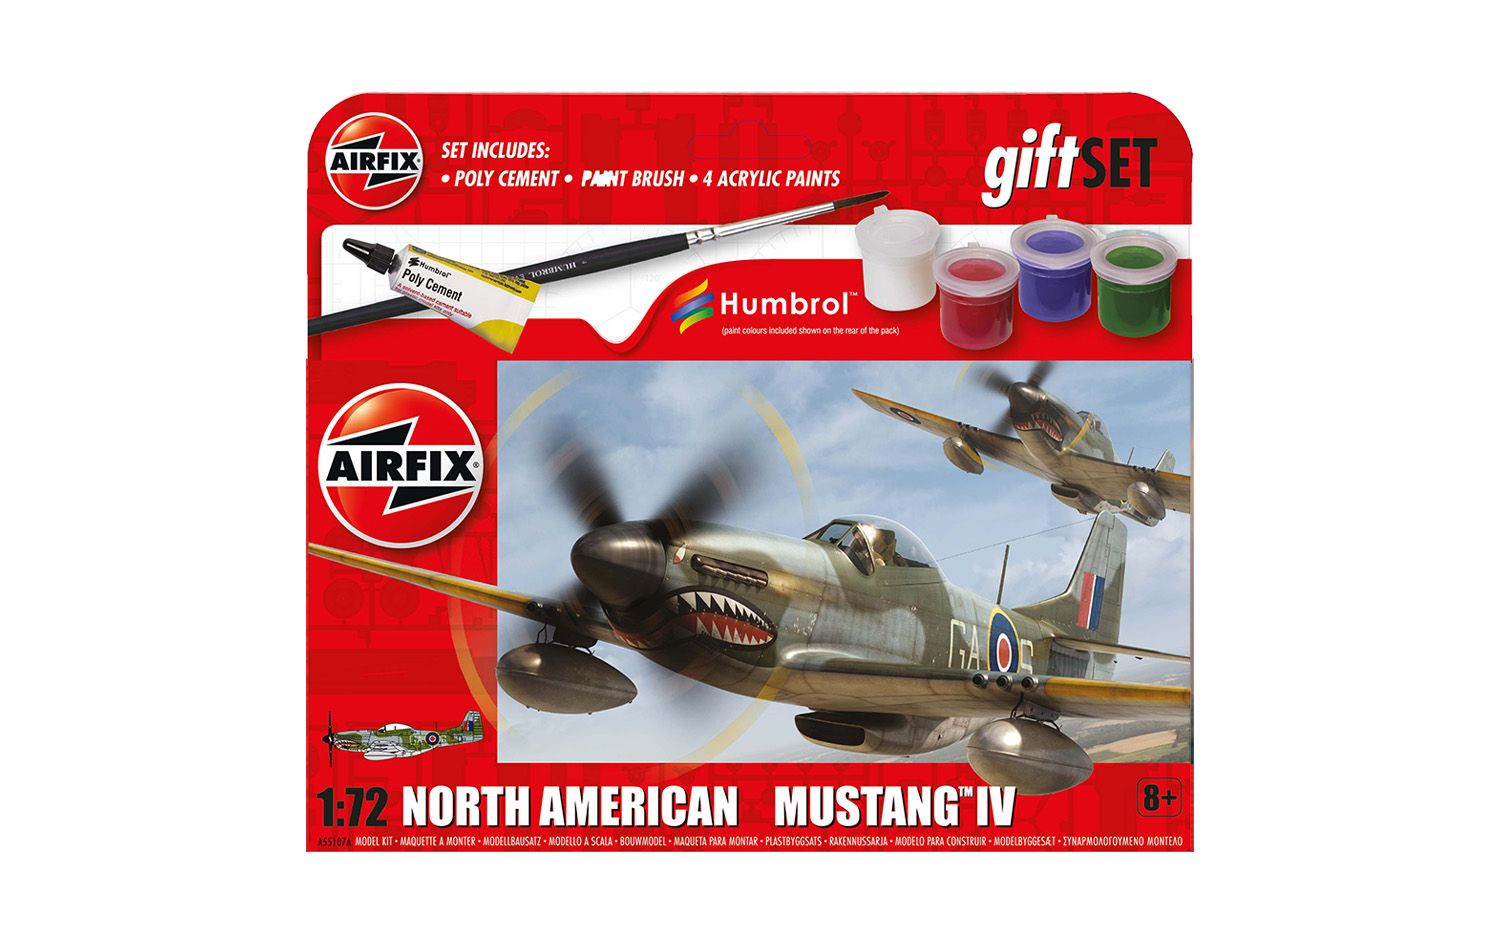 Maquette Mustang IV Kit Complet - 1/72 - AIRFIX A55107A